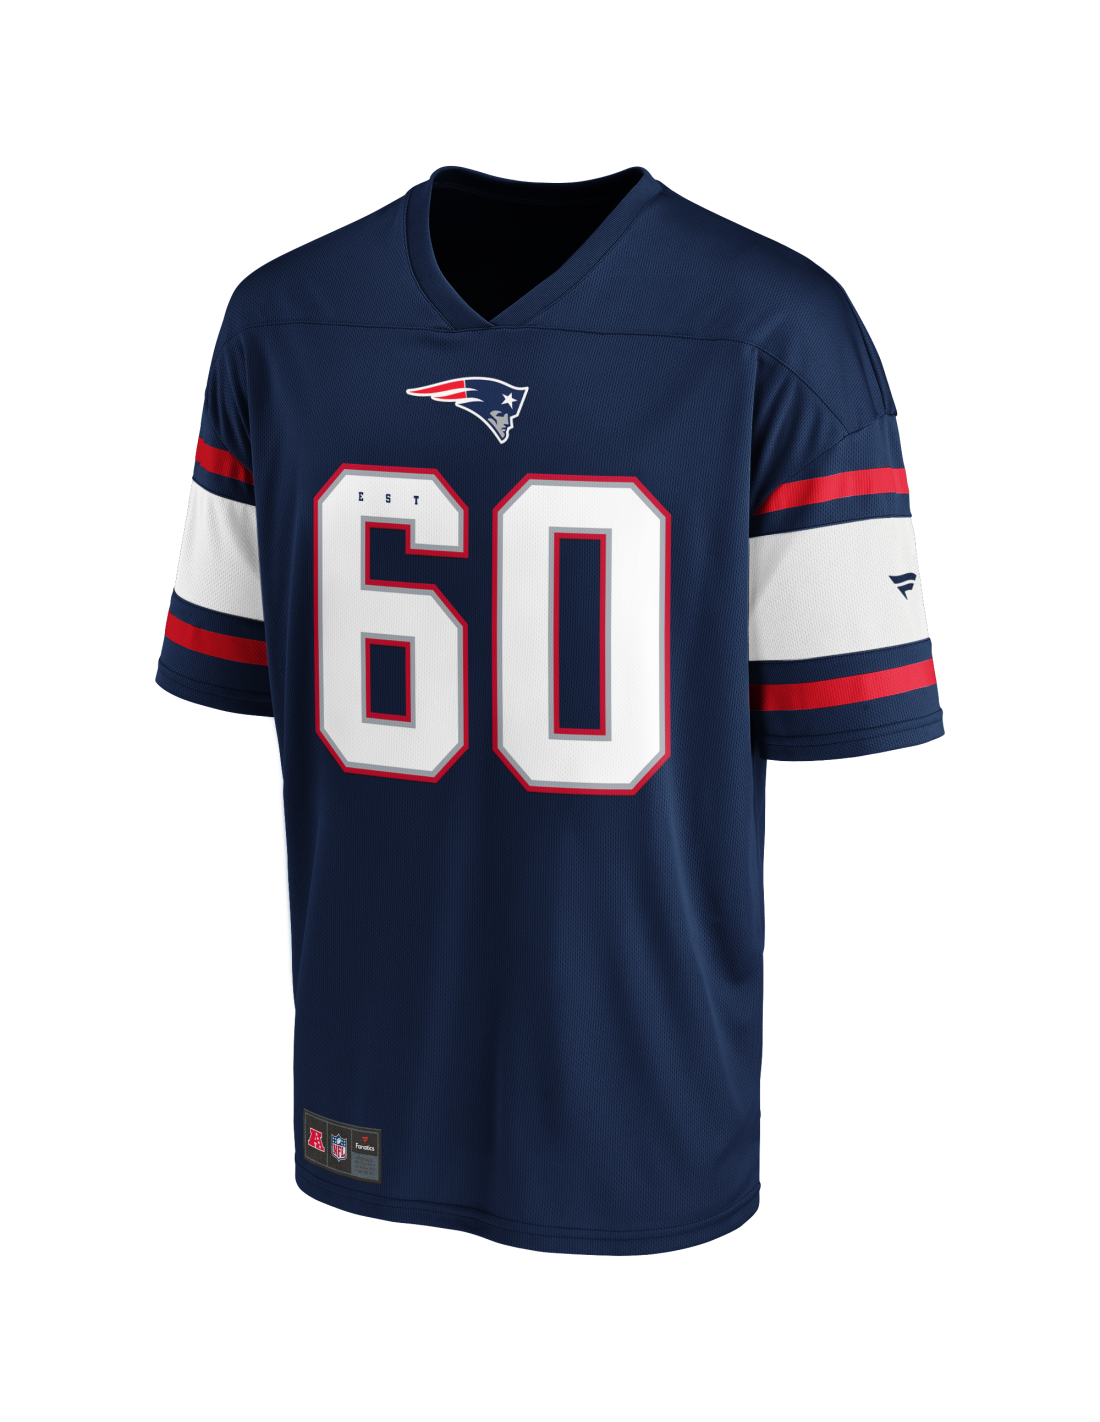 New England Patriots Foundation Supporters Jersey